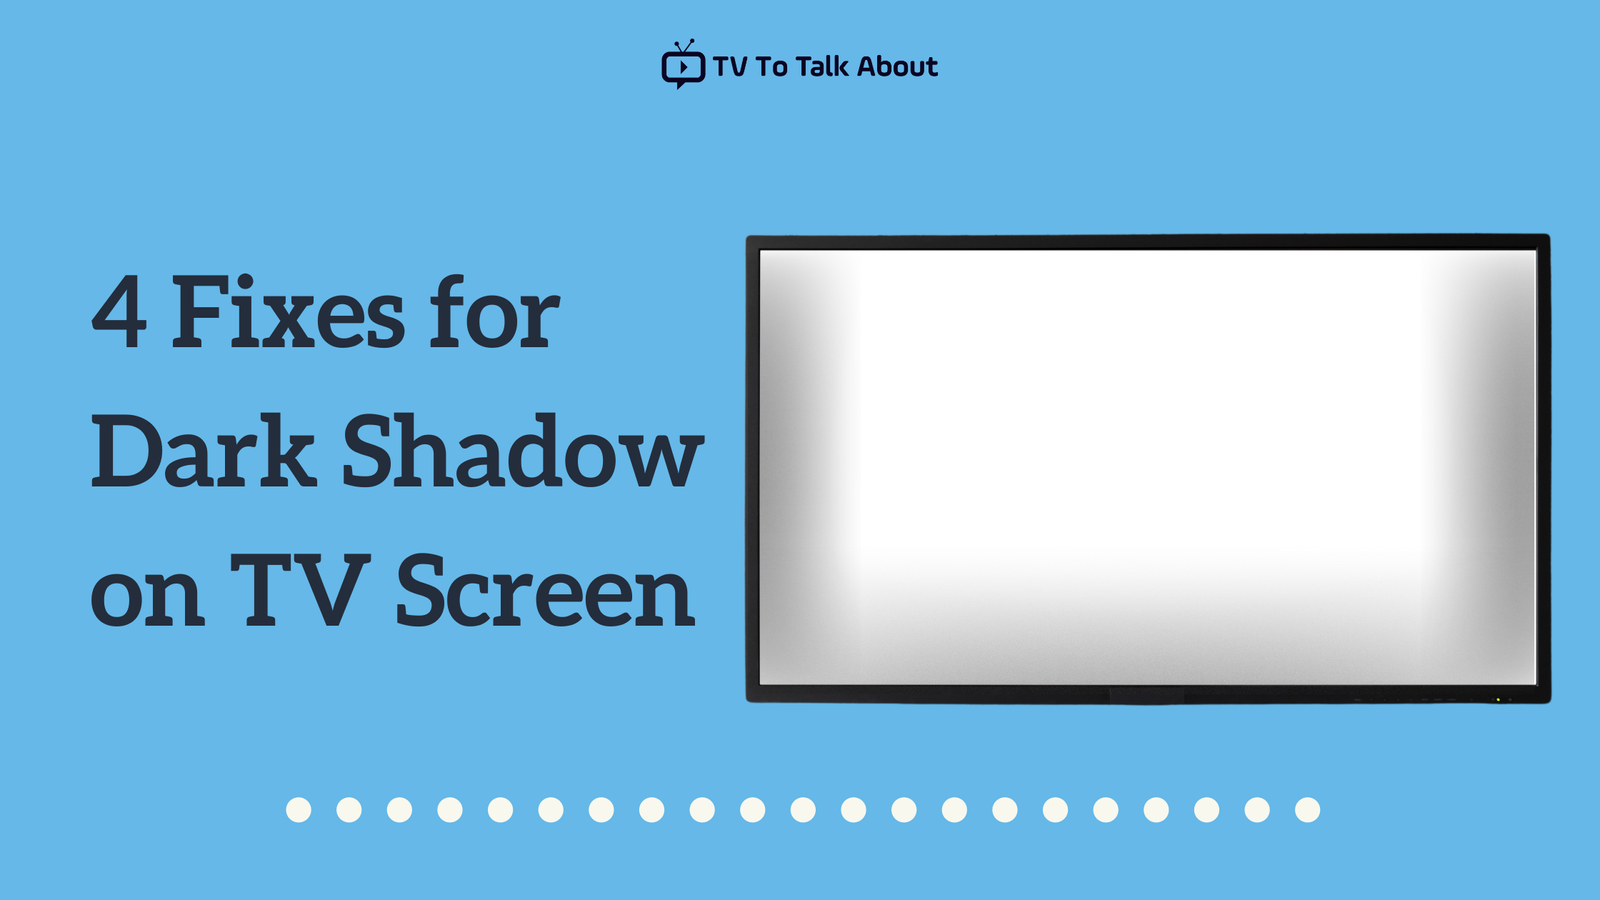 How to Fix Dark Shadow on TV Screen